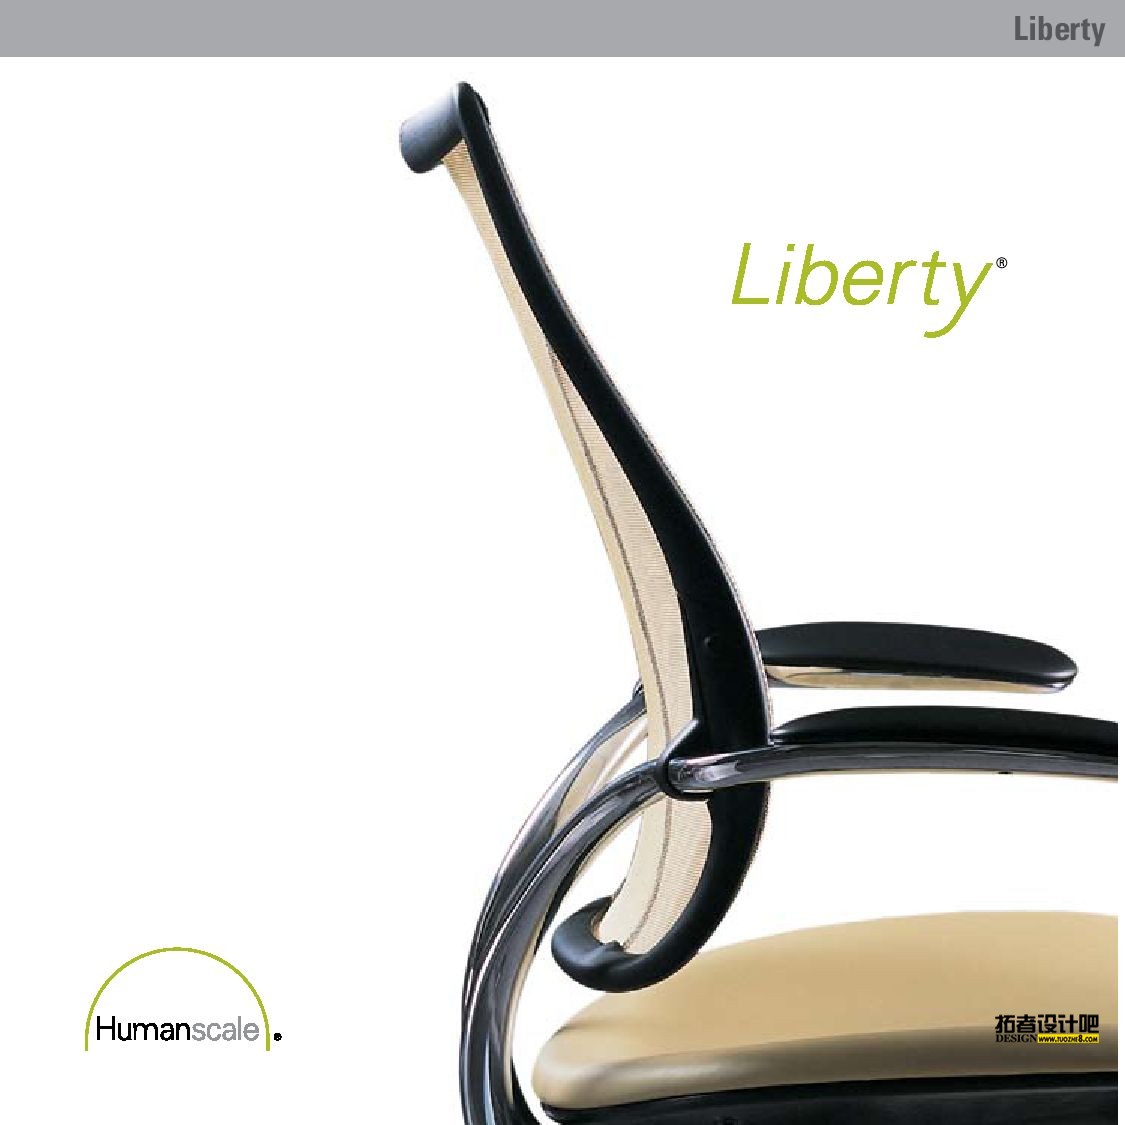 Humanscale Liberty chairpage_1.jpg